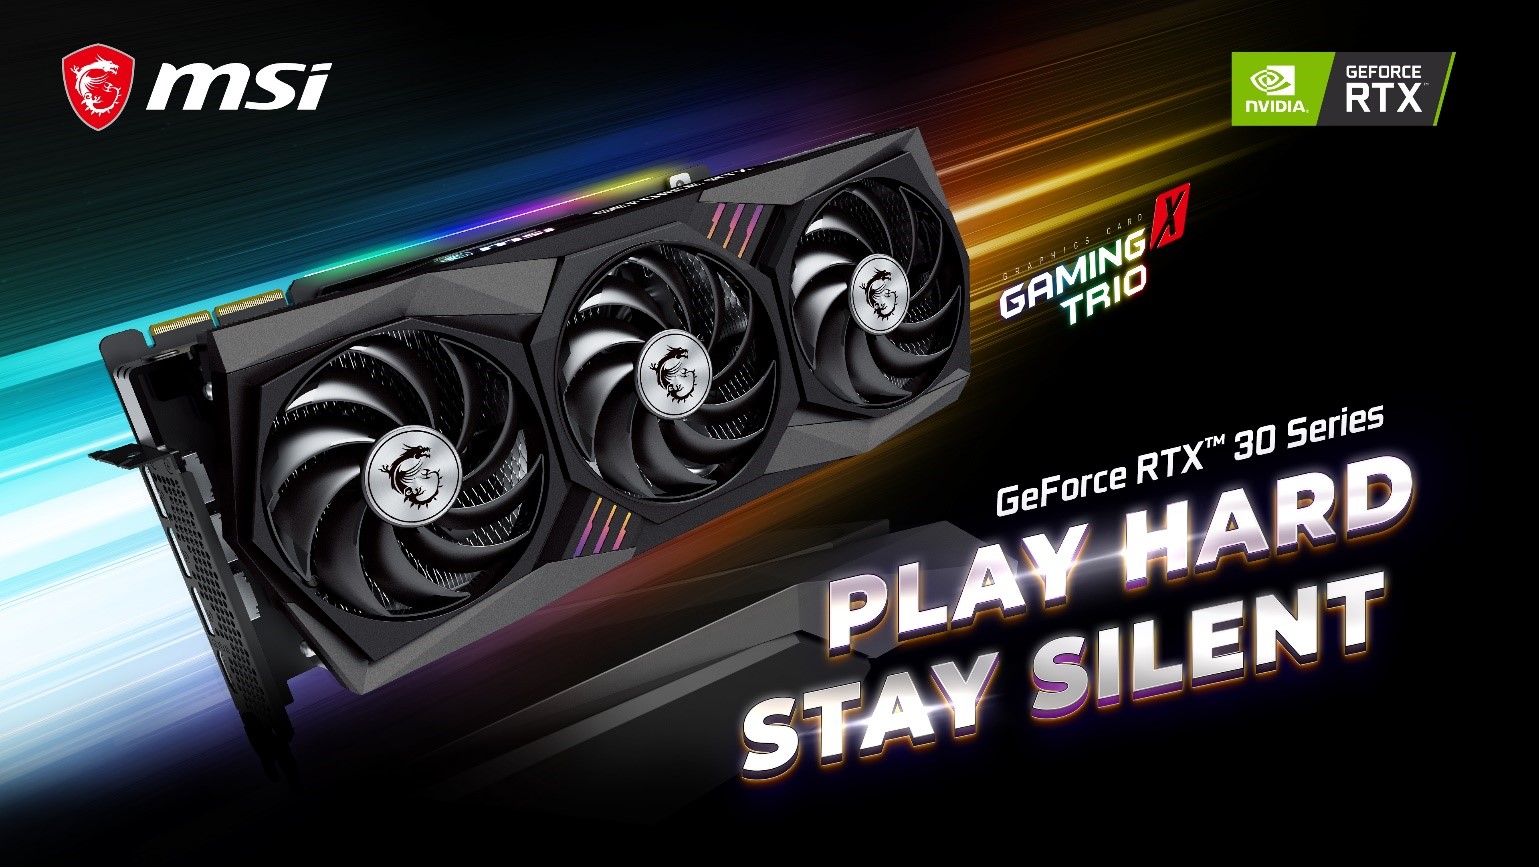 Msi Announces Geforce Rtx 3090 Rtx 3080 And Rtx 3070 Graphics Cards